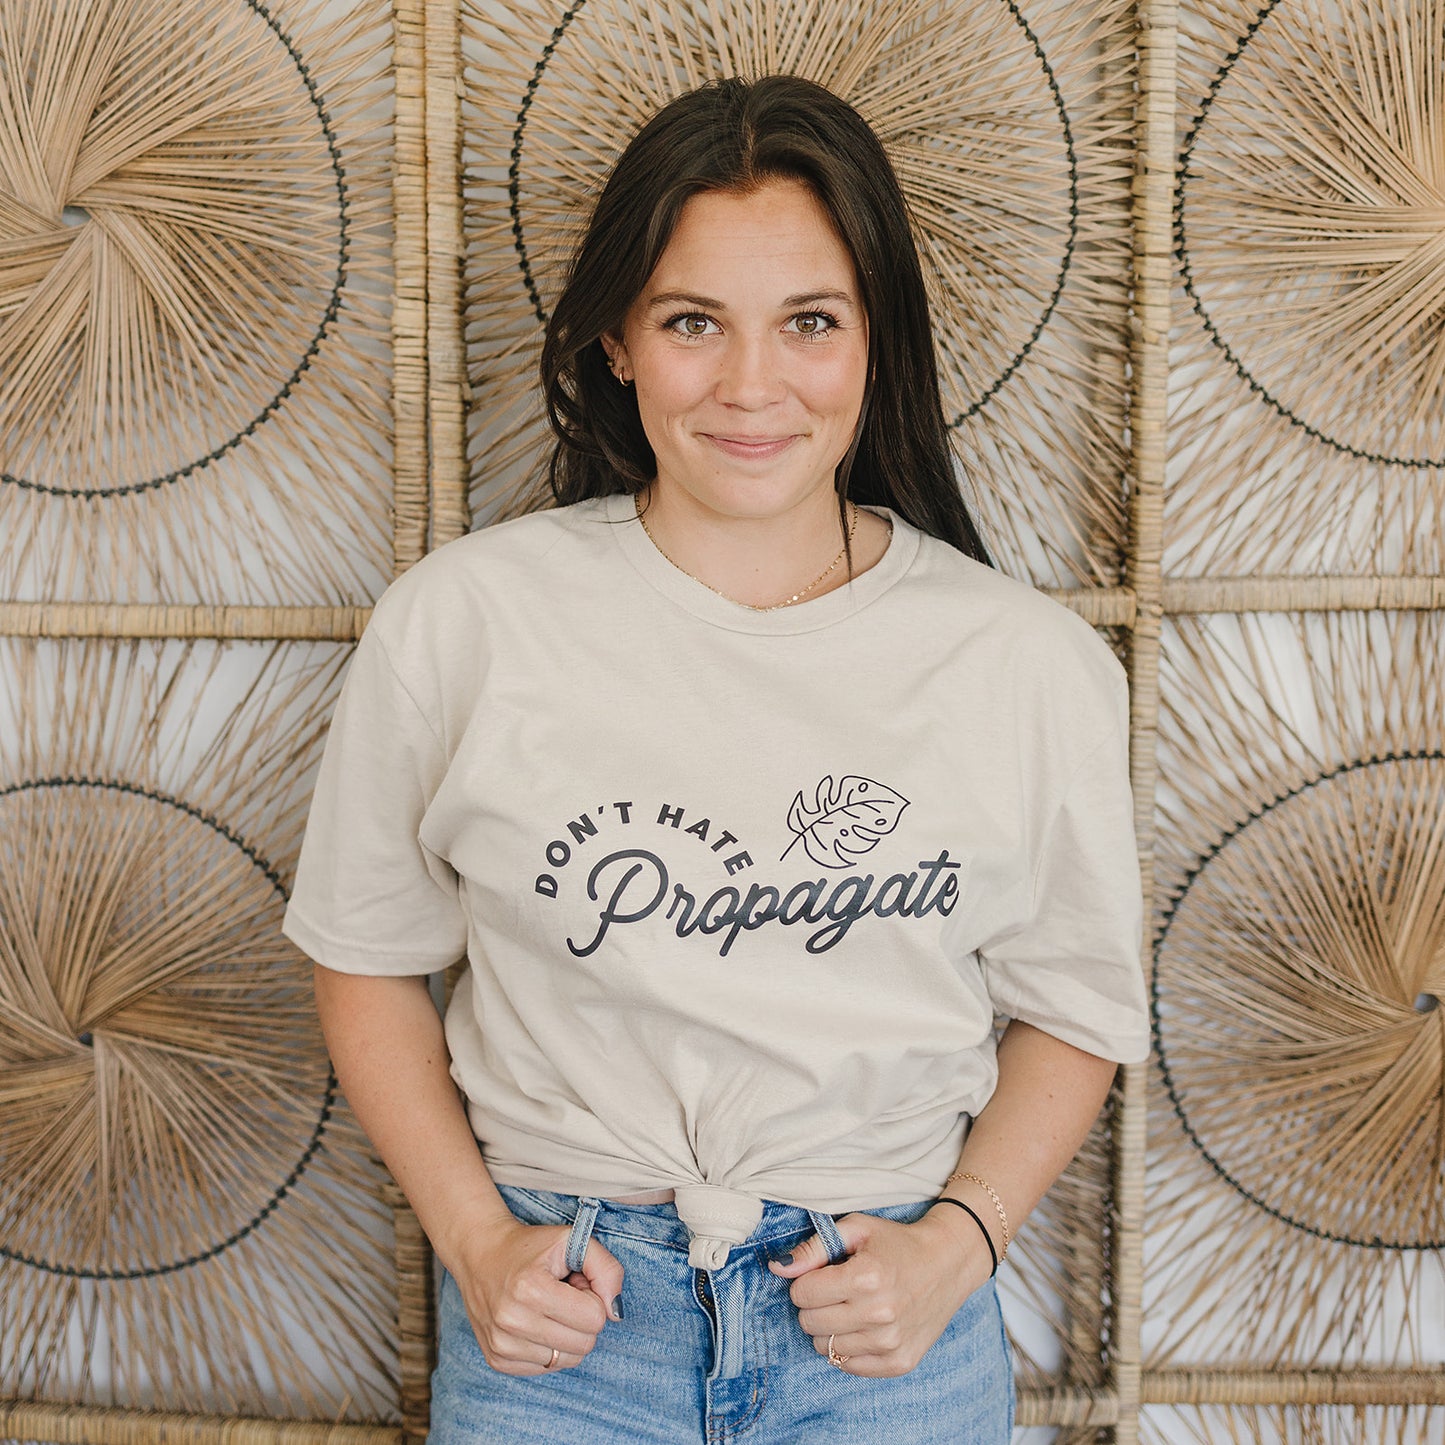 "Don't Hate, Propagate" Graphic T-Shirt